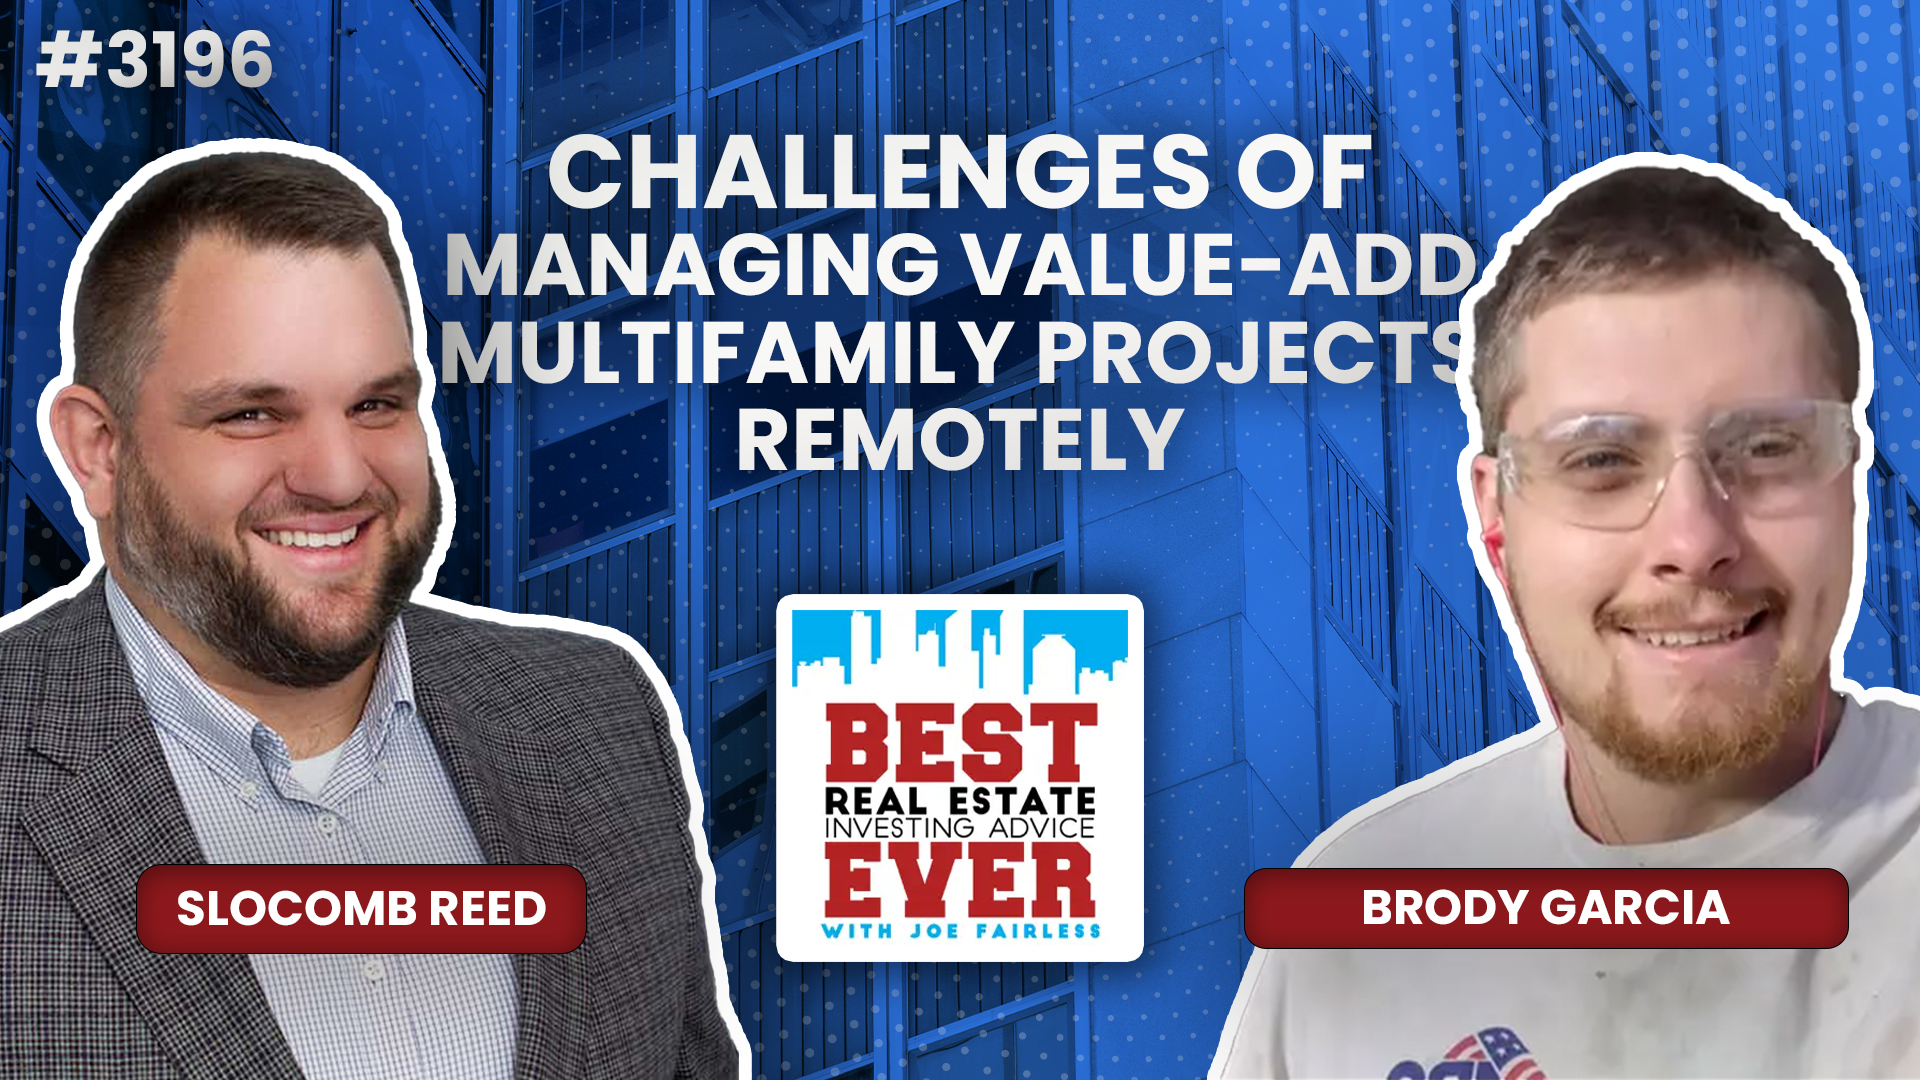 JF3196: Challenges of Managing Value-Add Multifamily Projects Remotely ft. Brody Garcia